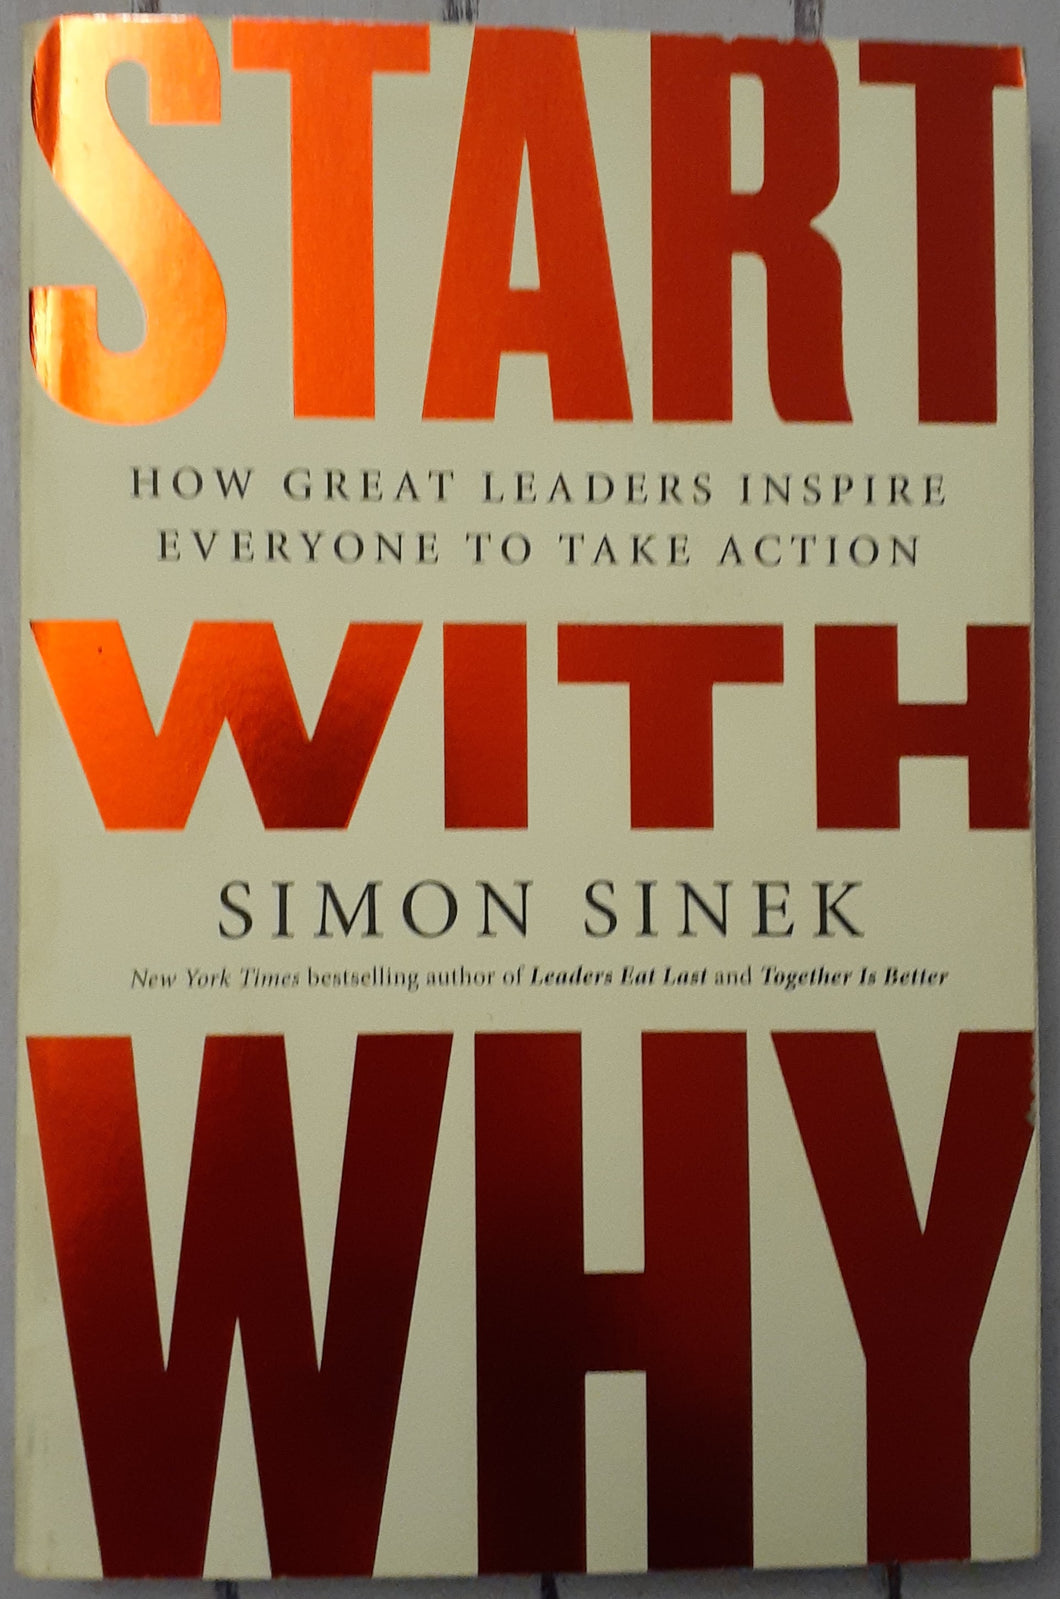 Start with Why: How Great Leaders Inspire Everyone to Take Action